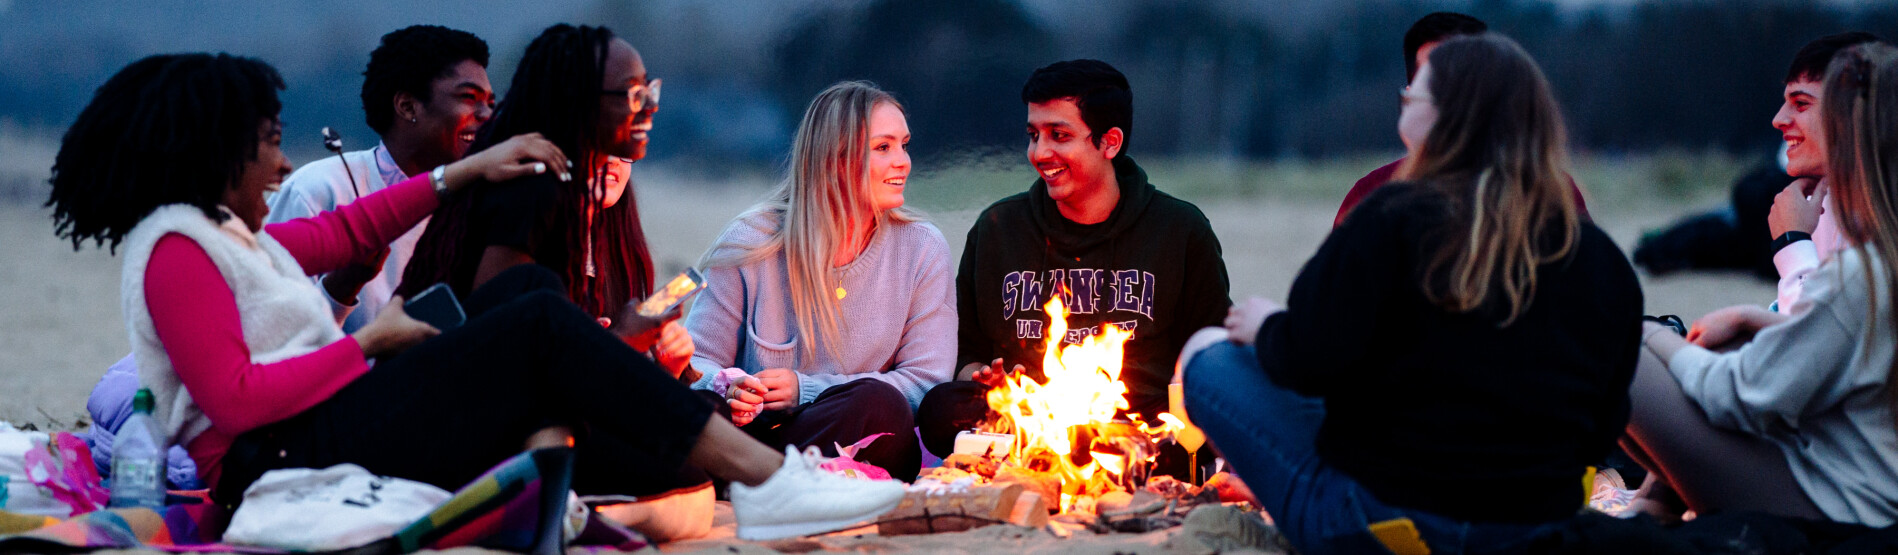 Students at a fire on beach